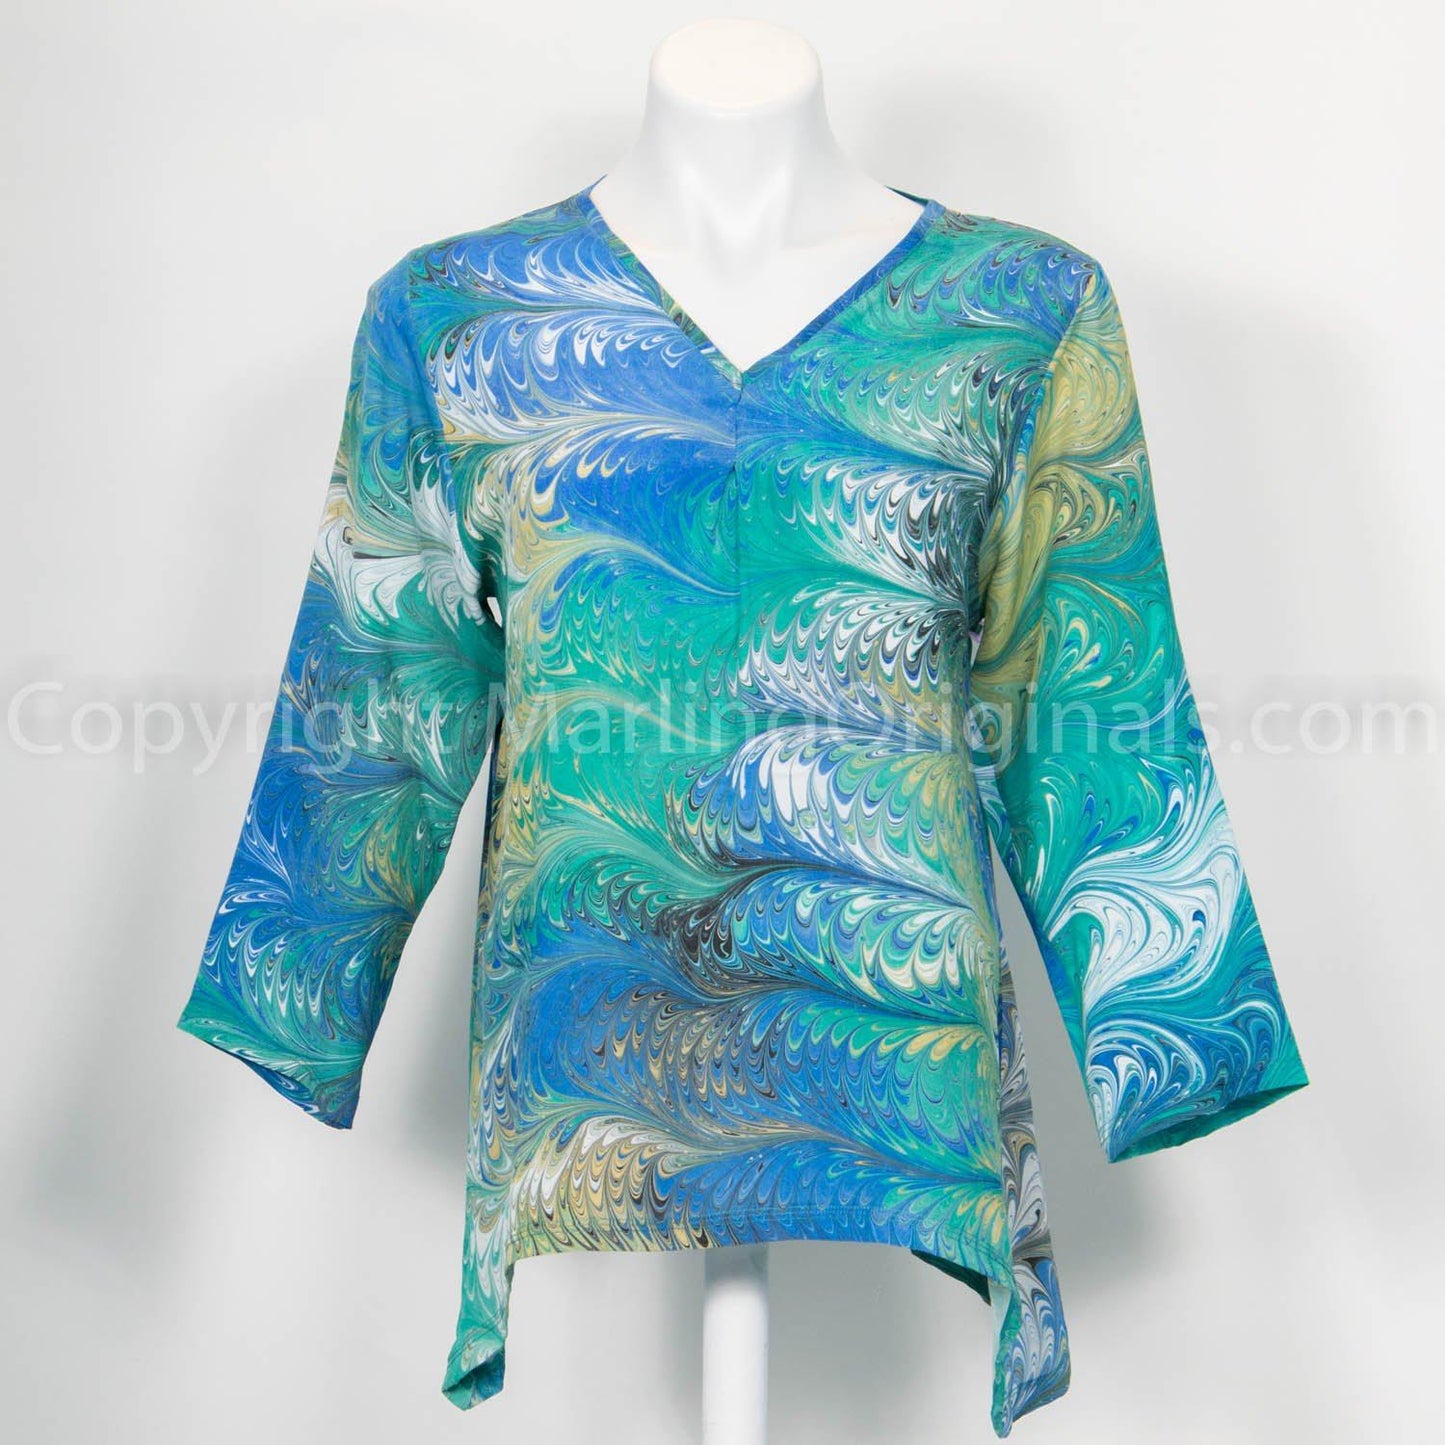 marbled silk tunic for women in green, blue, yellow, white. V neck. Long sleeves